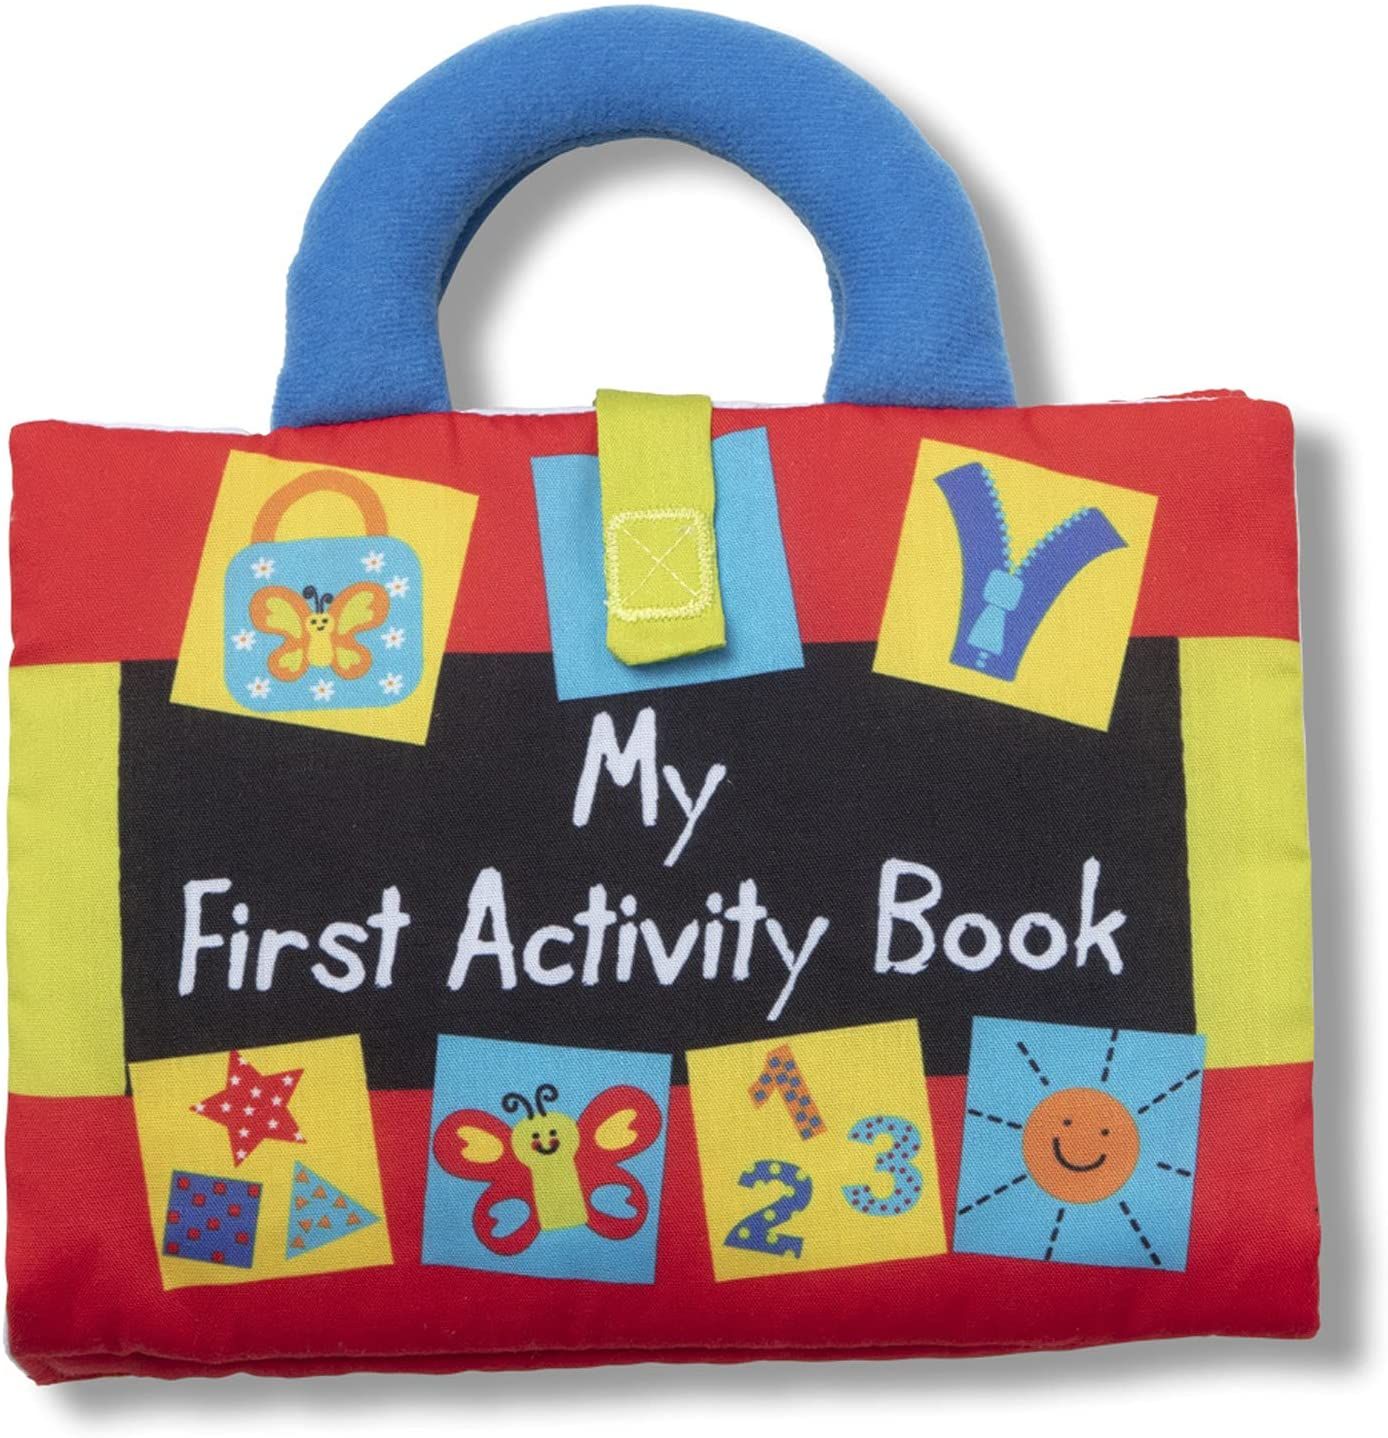 Image of My First Activity Book from Melissa & Doug